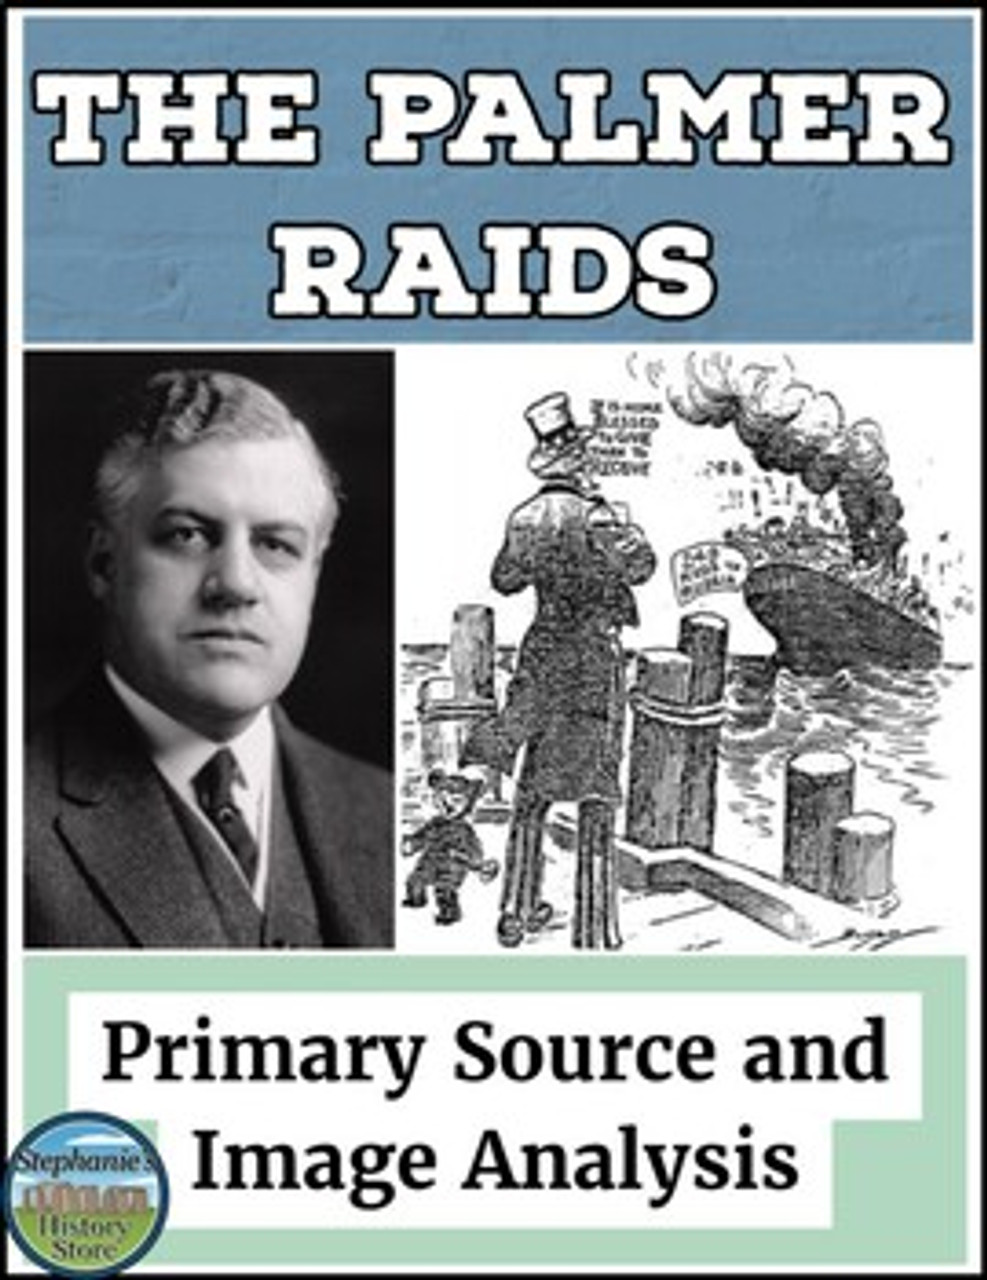 hypothesis 1 what caused the palmer raids